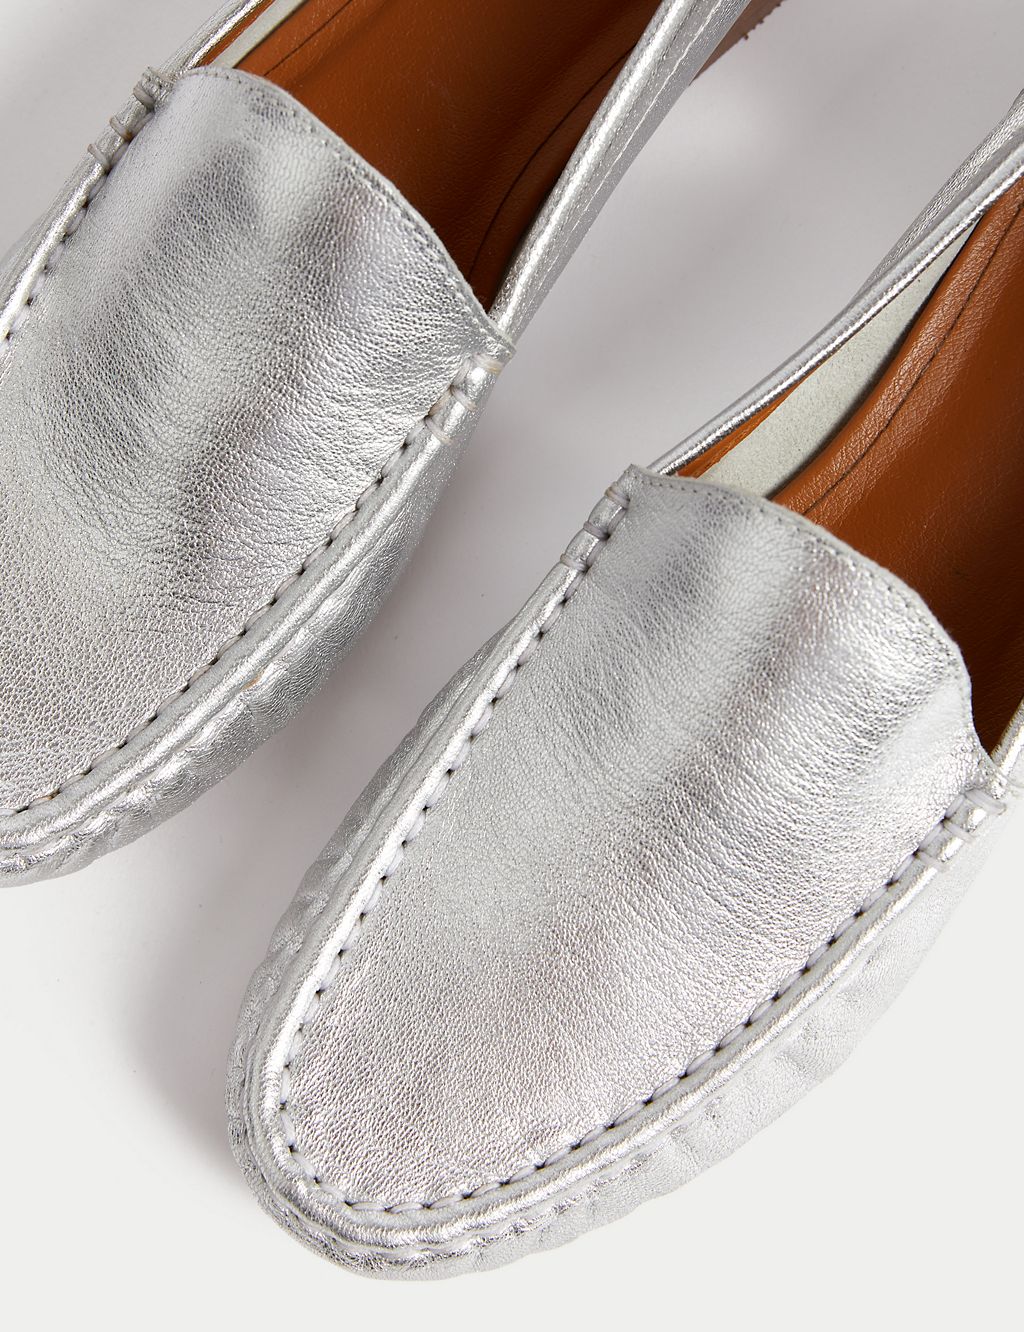 Leather Slip On Flat Loafers 2 of 3